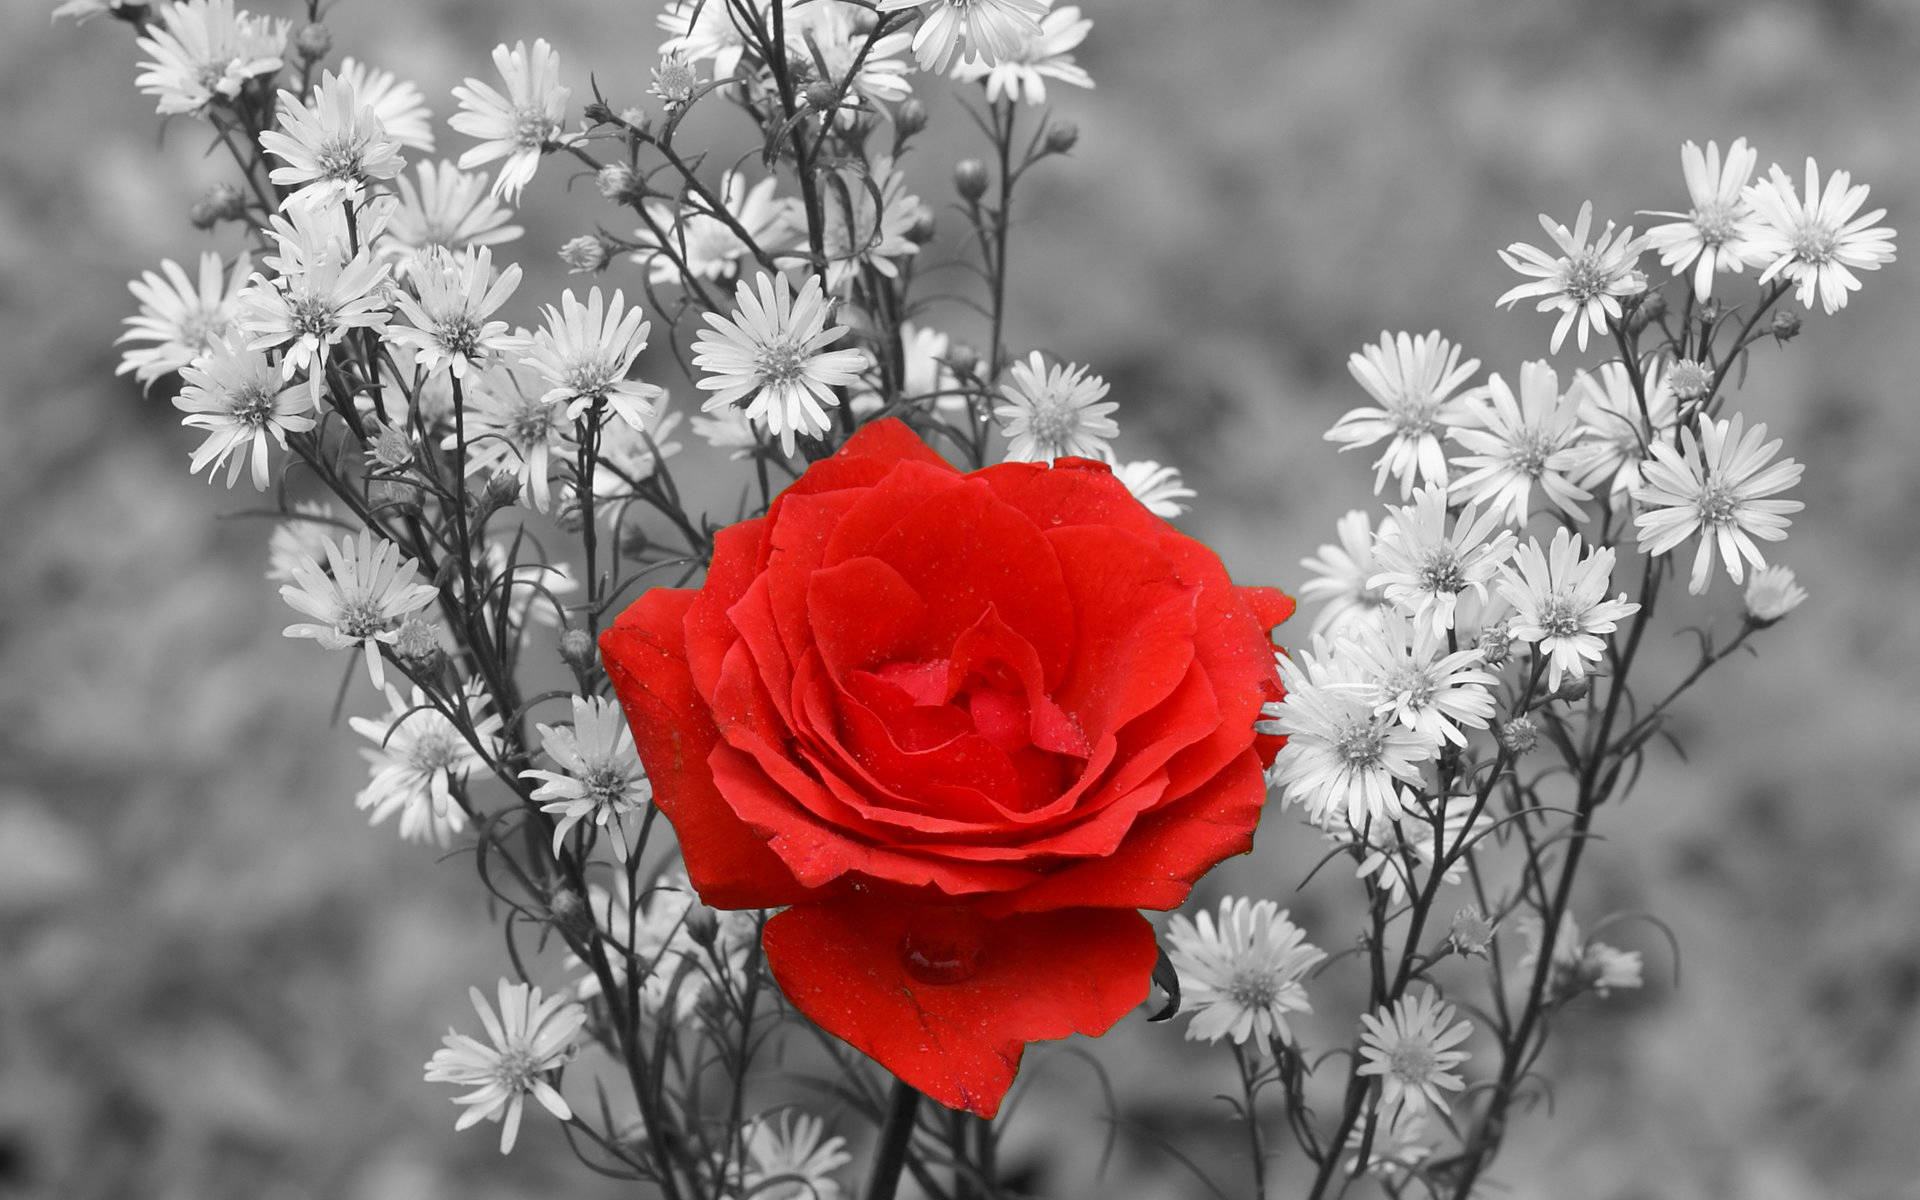 A Radiant Red Rose Amidst White Flowers Wallpaper